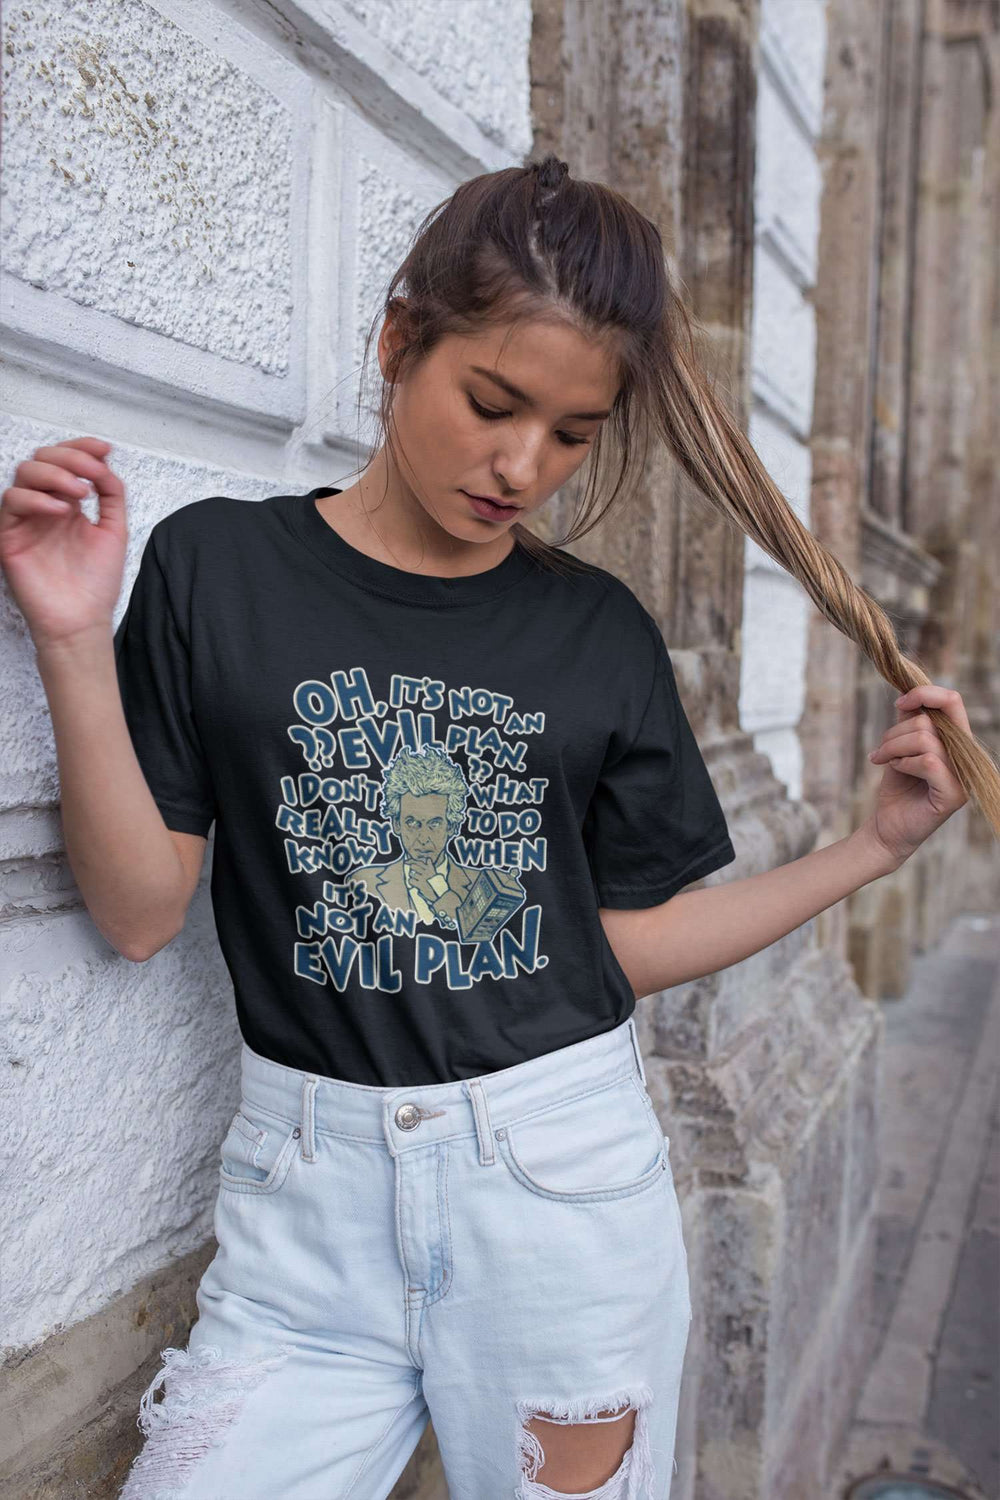 Designs by MyUtopia Shout Out:When It's Not an Evil Plan Adult Unisex T-Shirt